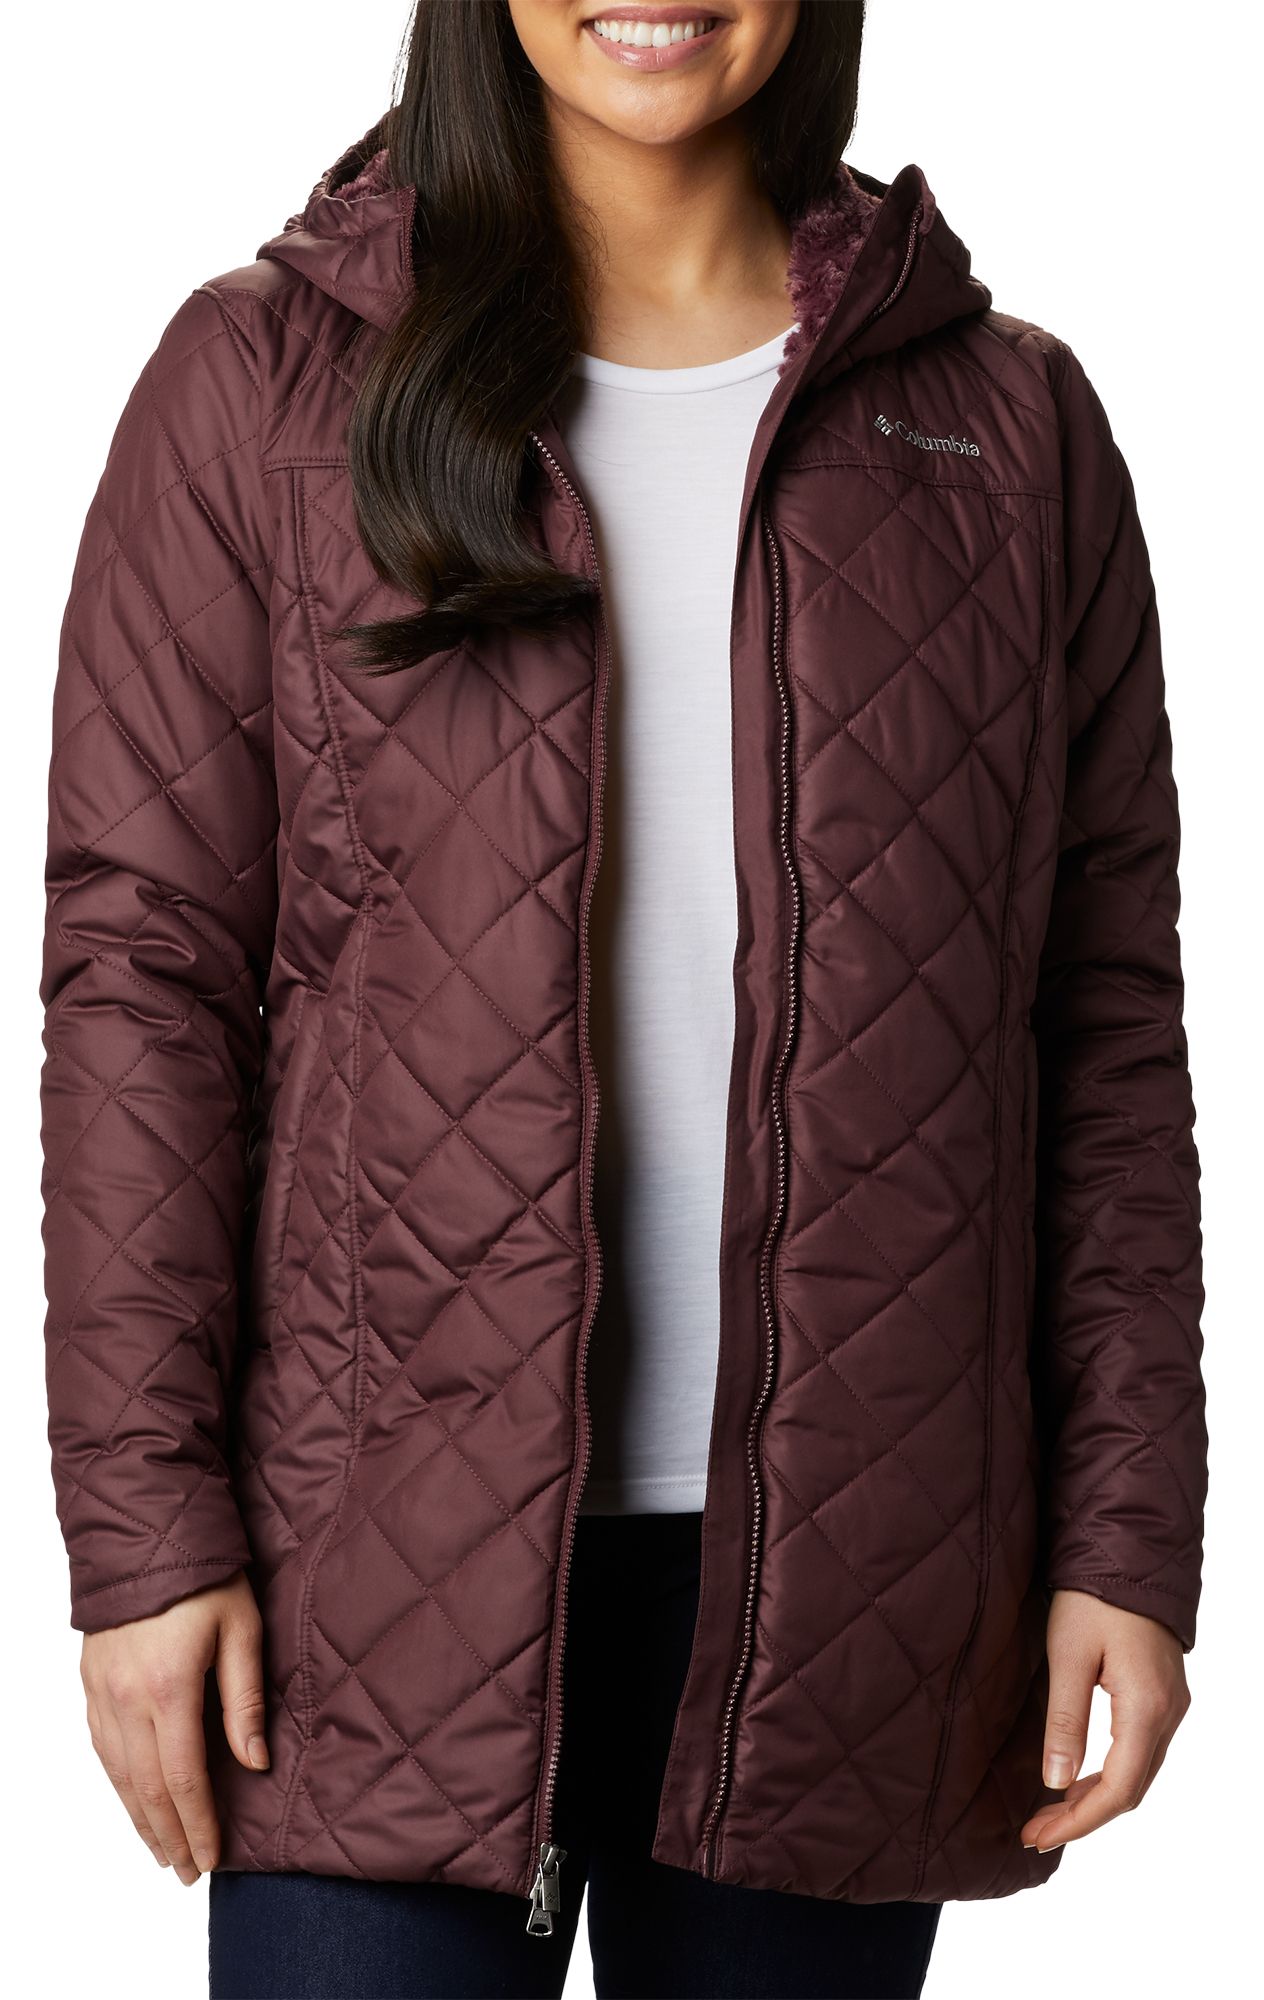 copper crest hooded jacket columbia